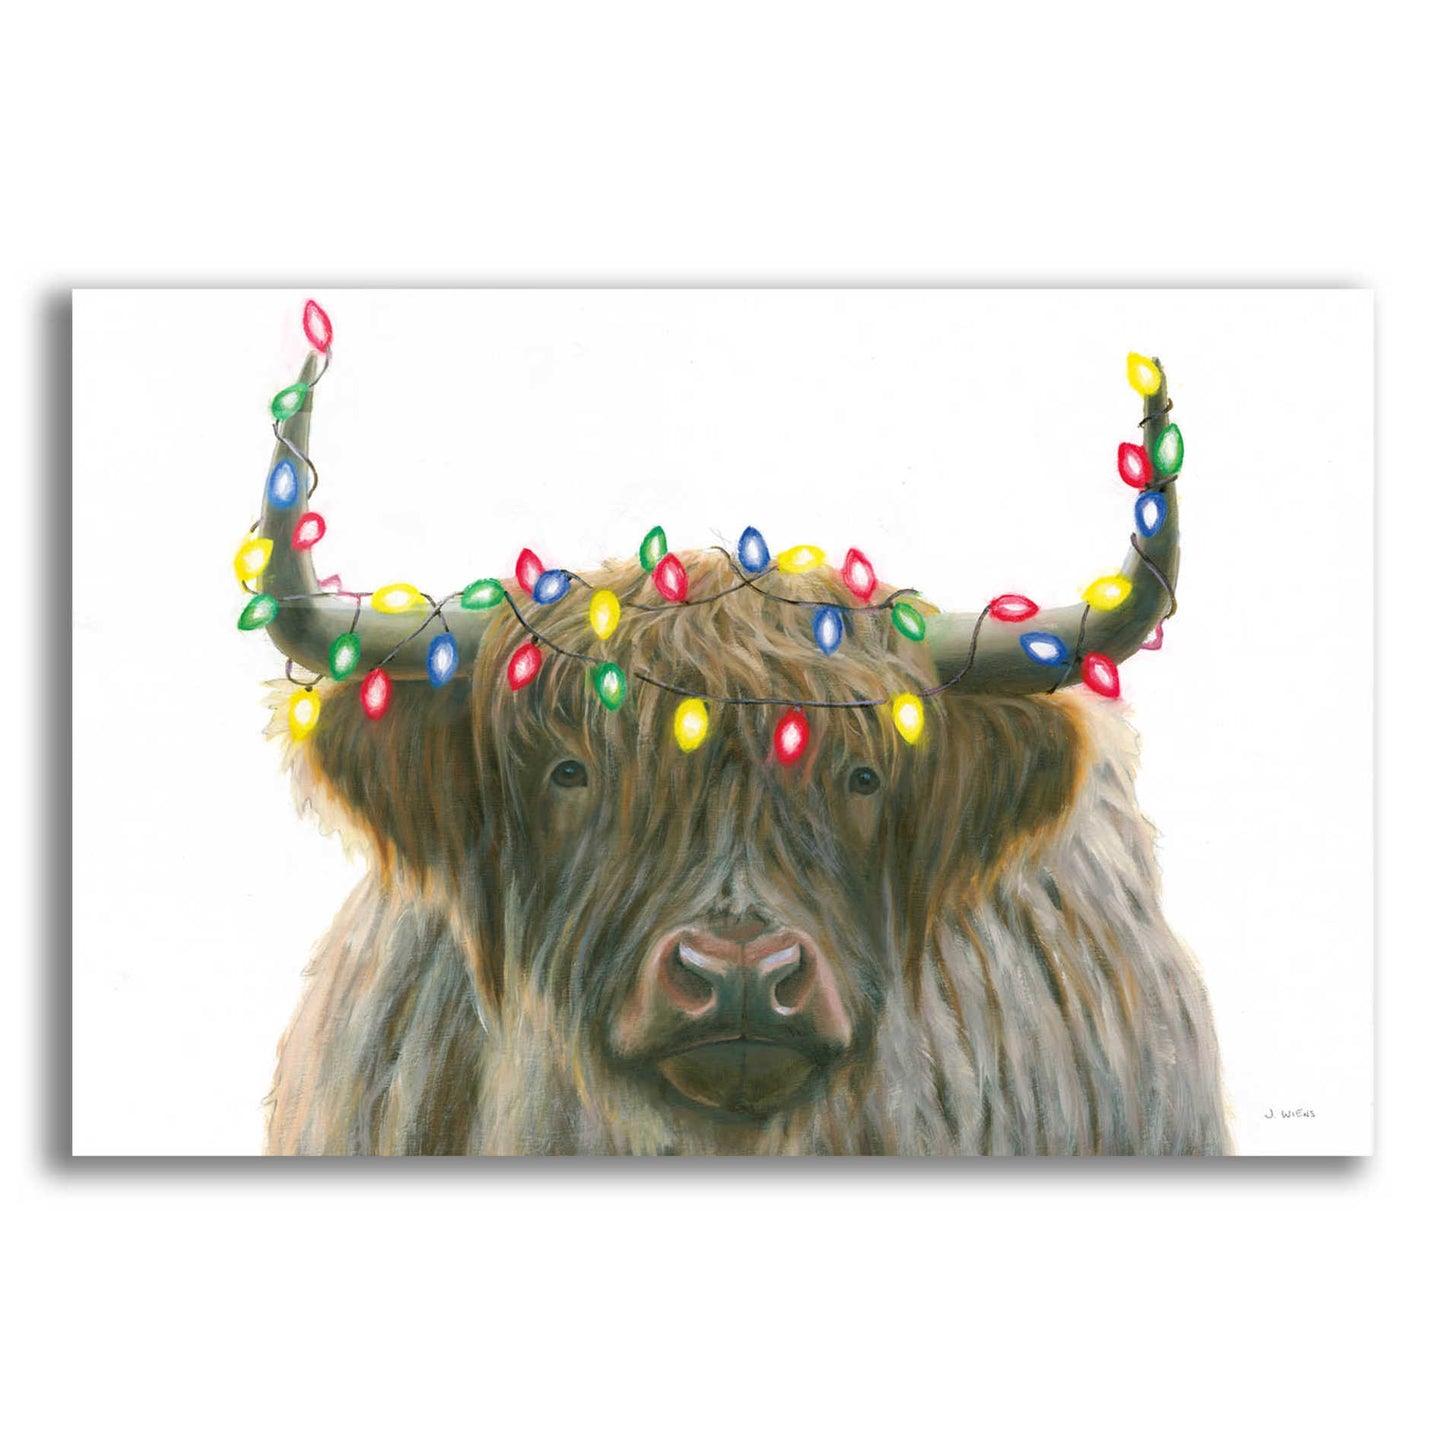 Epic Art 'Holiday Highlander' by James Wiens, Acrylic Glass Wall Art,18x12x1.1x0,26x18x1.1x0,40x26x1.74x0,60x40x1.74x0